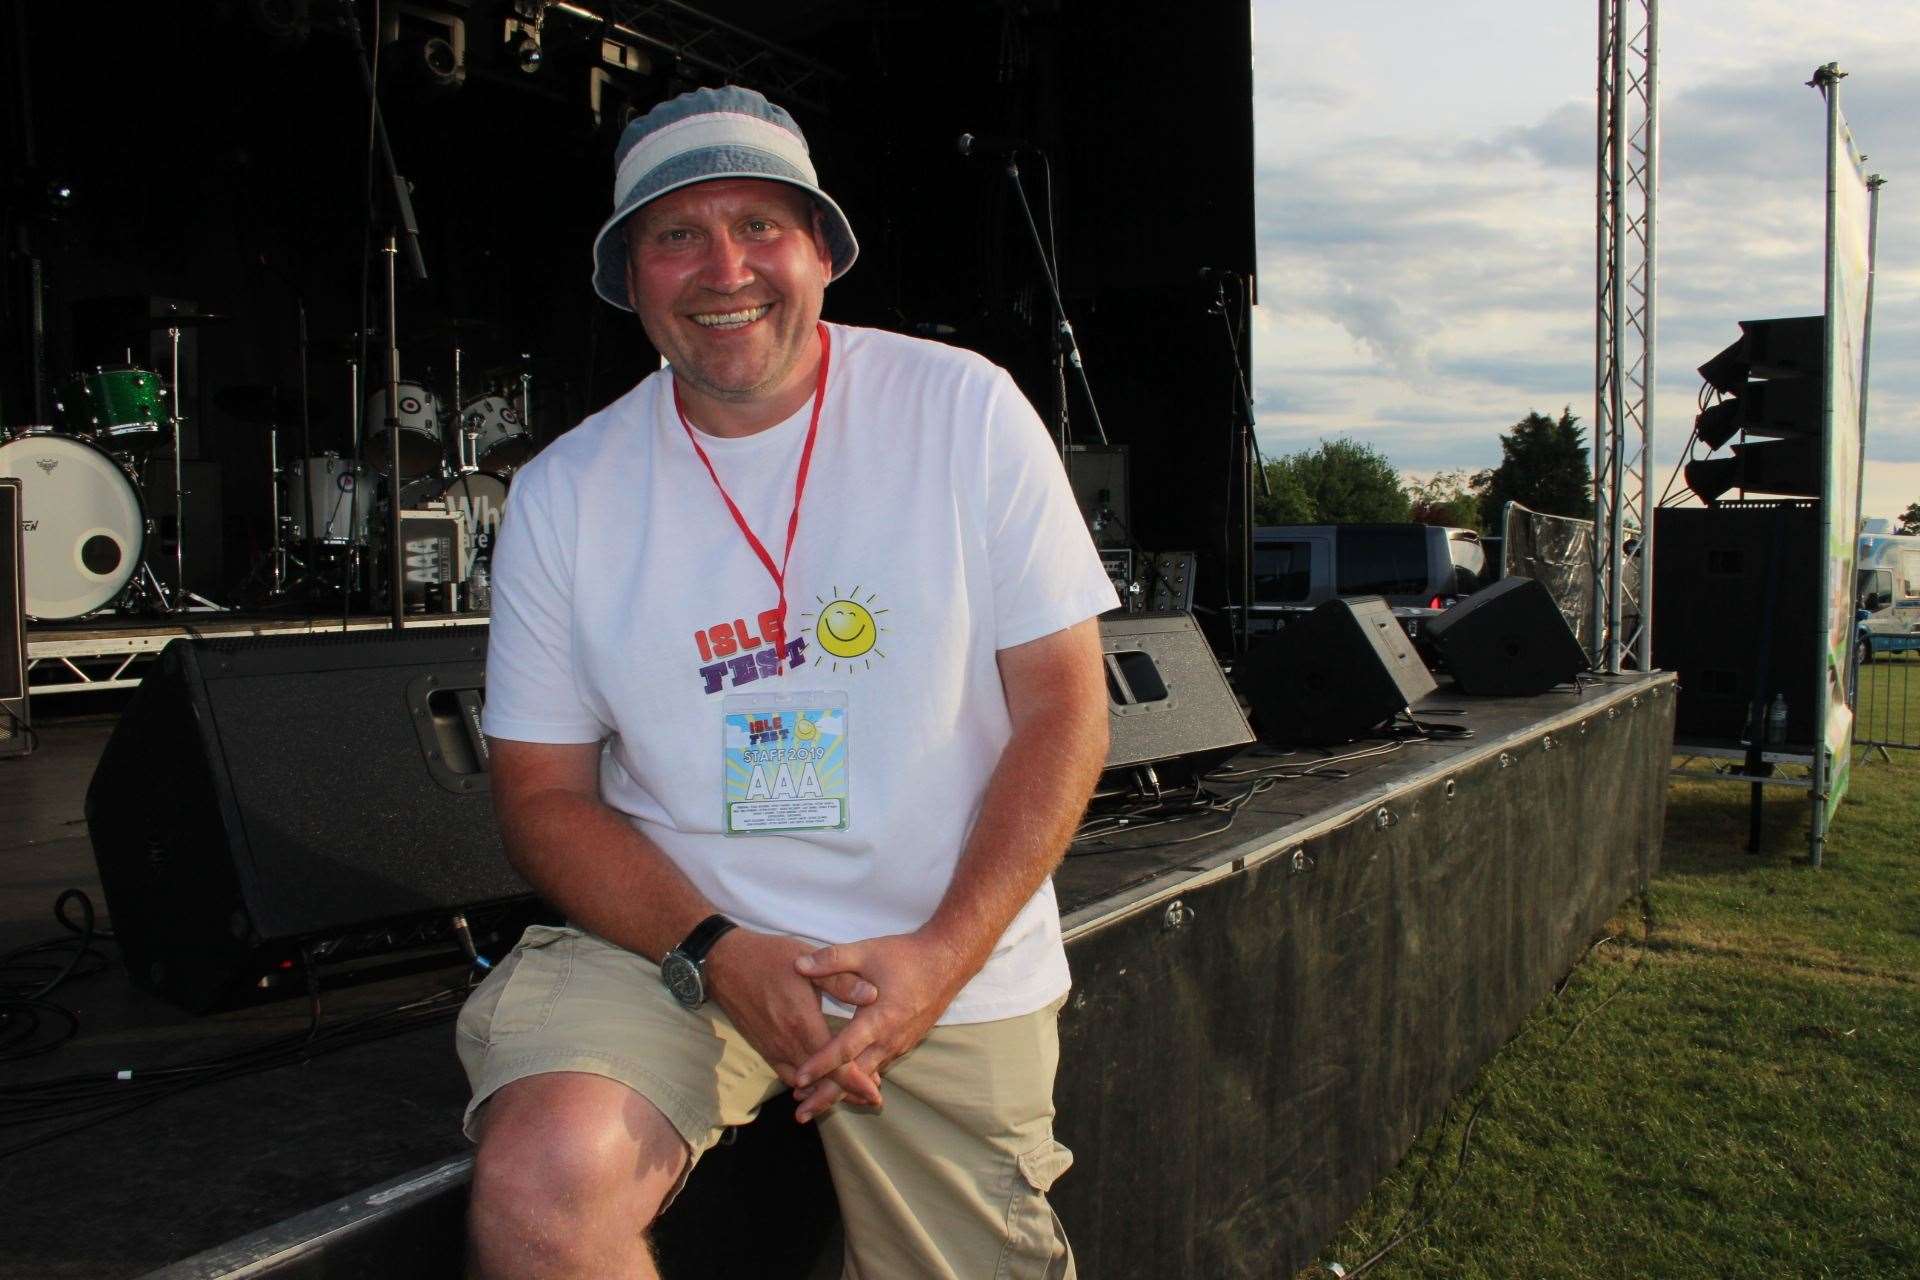 Paul Rogers at last year's Isle Fest on the Isle of Sheppey